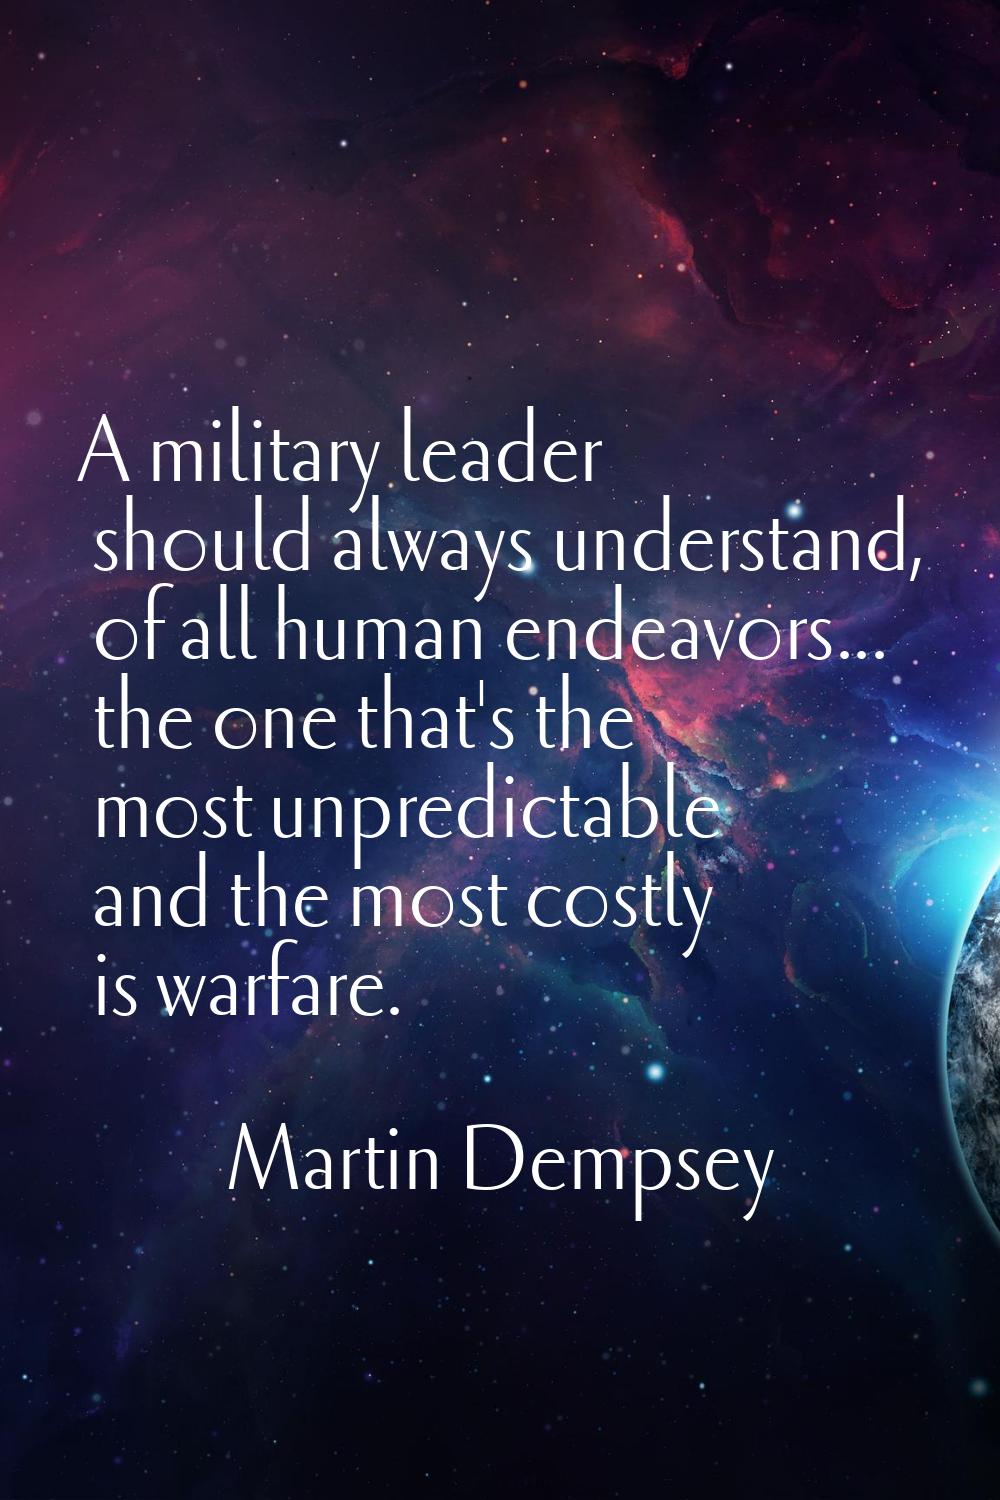 A military leader should always understand, of all human endeavors... the one that's the most unpre